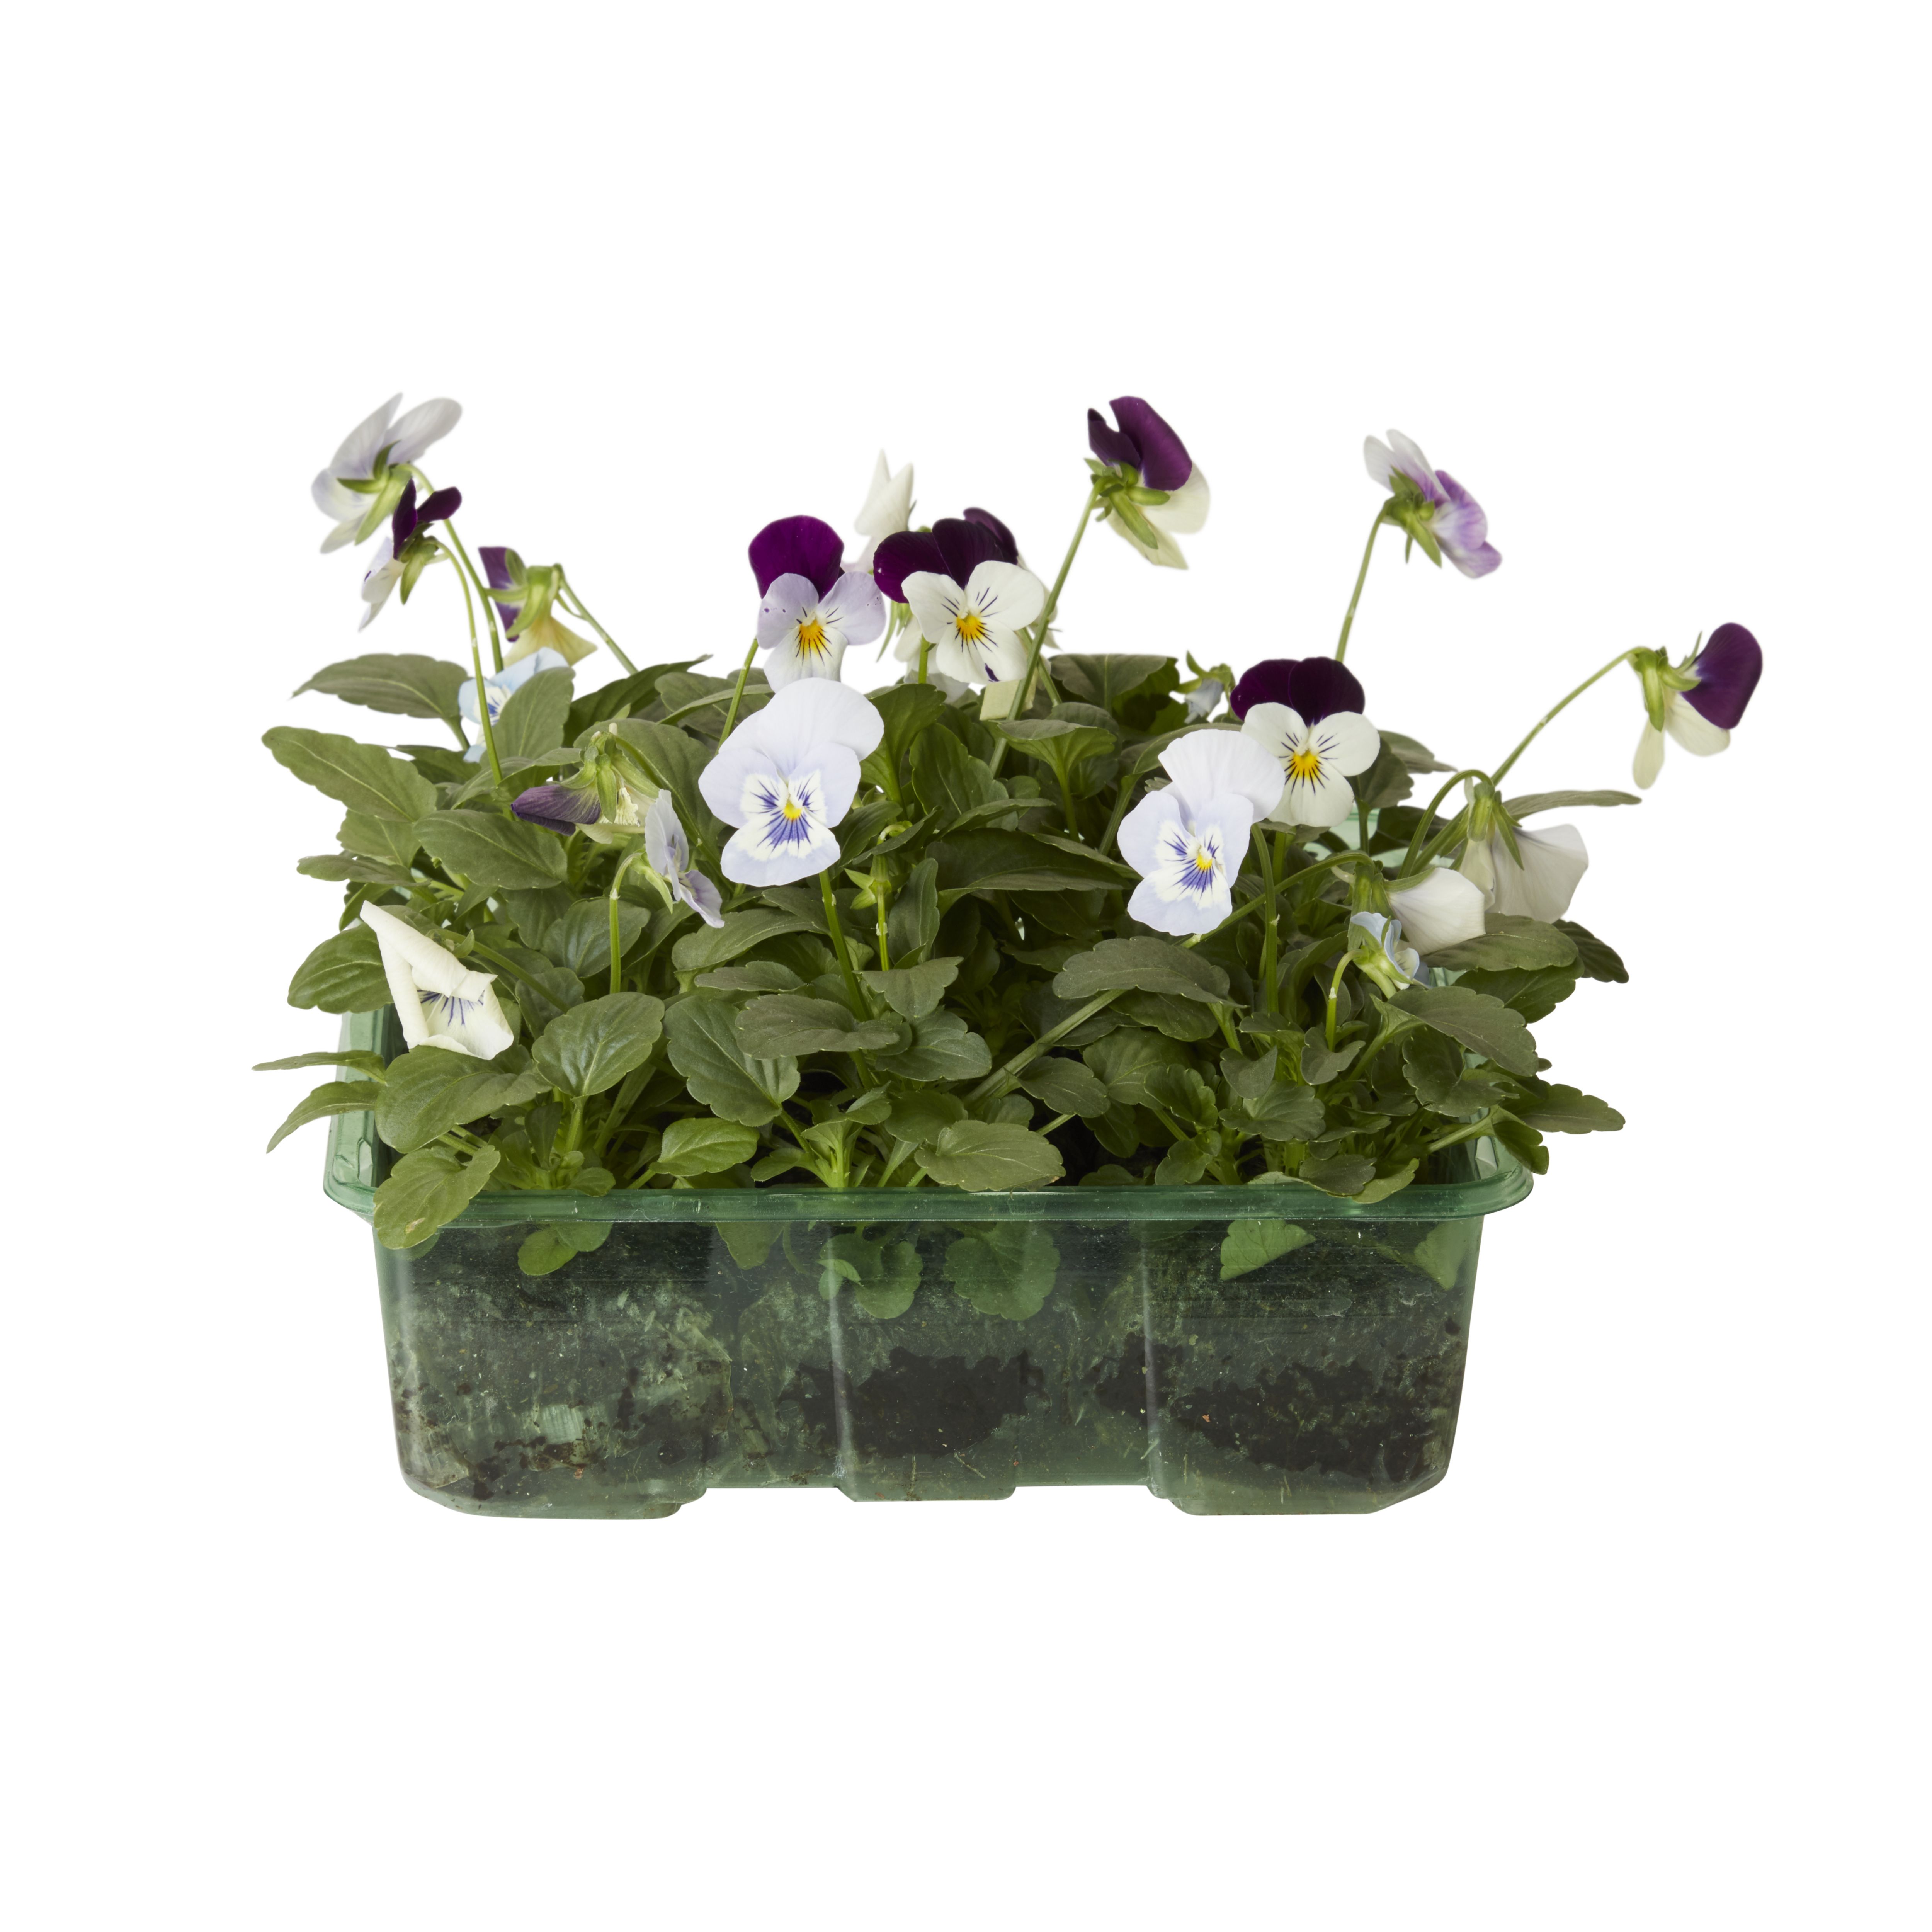 9 cell Dianthus, pansy & viola Autumn Bedding plant, Pack of 4